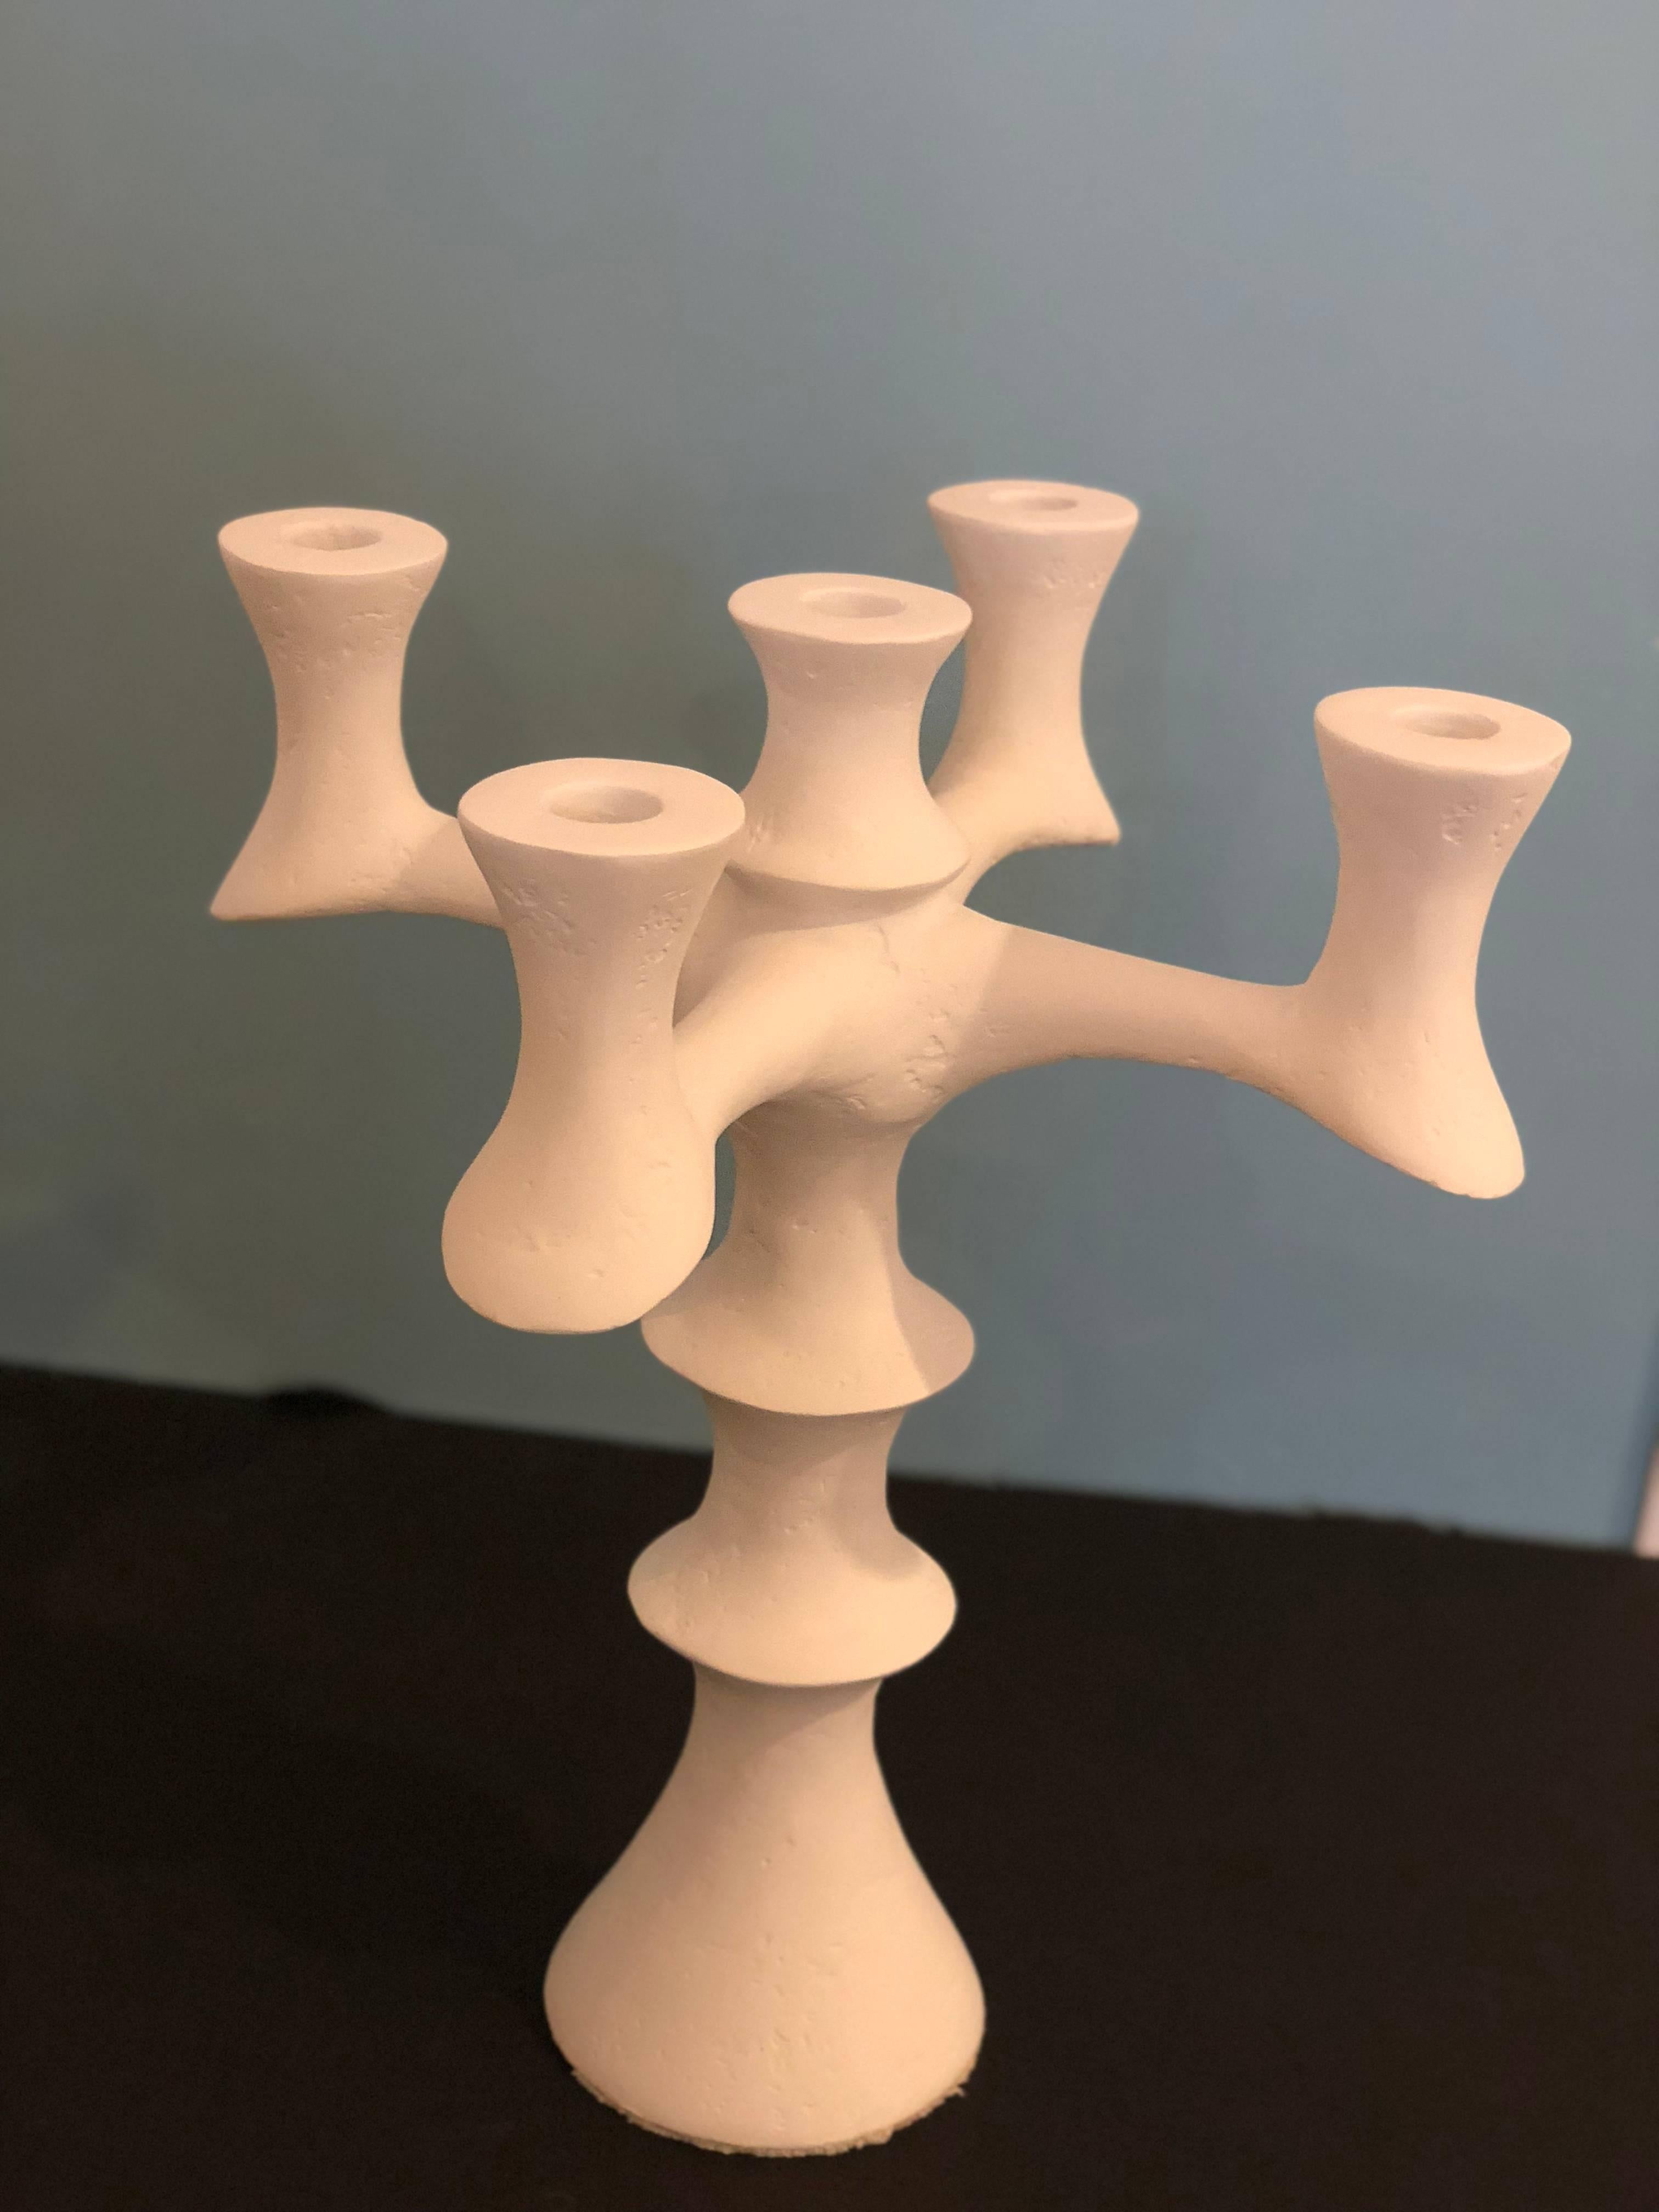 Sculpted plaster of Paris candleholder. A reminiscent of Giacometti's work, this five candleholder has a sleek yet elegant design. With its soft edges and texture it makes for an outstanding centerpiece for any console or table. Candleholders have